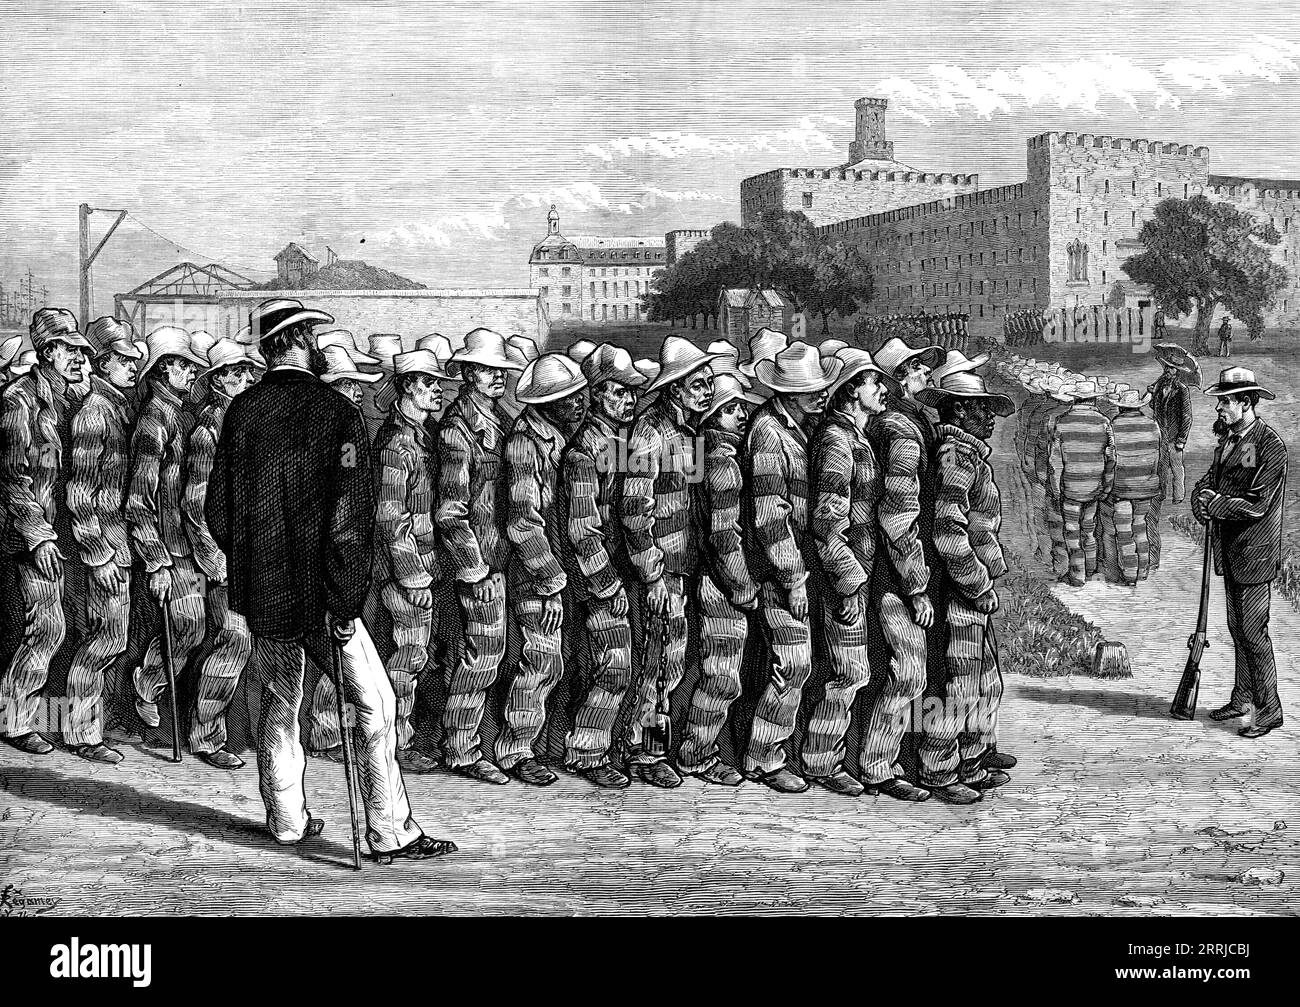 American Sketches: Prison Life on Blackwell's Island - No. 1. returning from work, 1876. 'In the penitentiary...where the sketch was taken by our correspondent, the late M. Regamey, about 600 males and females are usually confined at one time. The men are kept at work in quarrying and cutting stone, building a seawall for the harbour, making roads, and gardening; but some of them work at their own skilled trades. Our Illustration shows the slavish appearance of a gang of these fellows under the eye of their armed keeper, as they come back from the daily task of hard labour...In the city of New Stock Photo